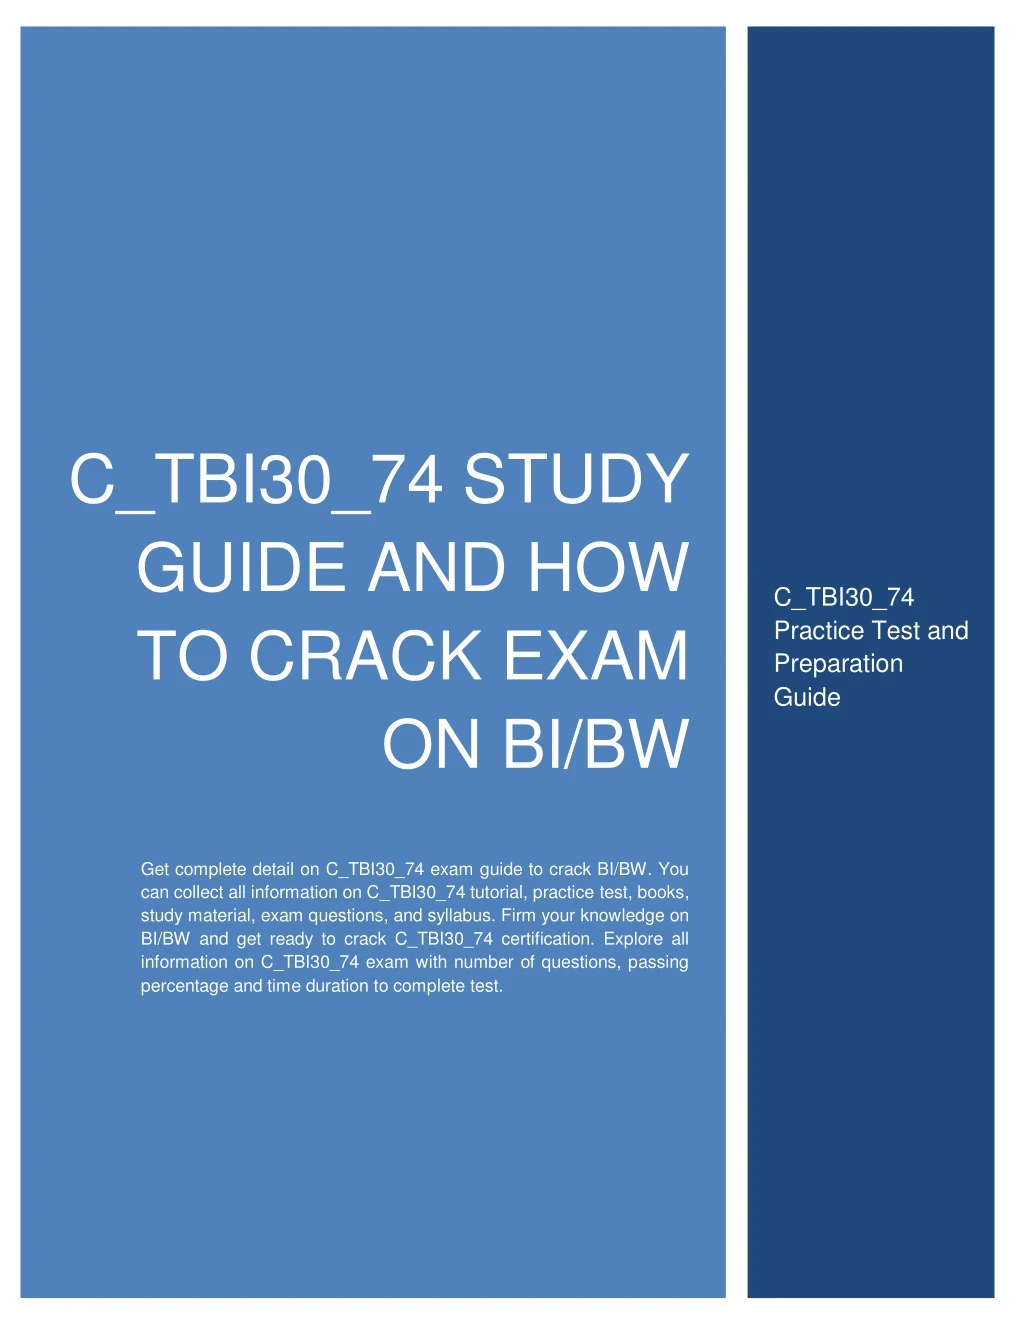 c tbi30 74 study guide and how to crack exam